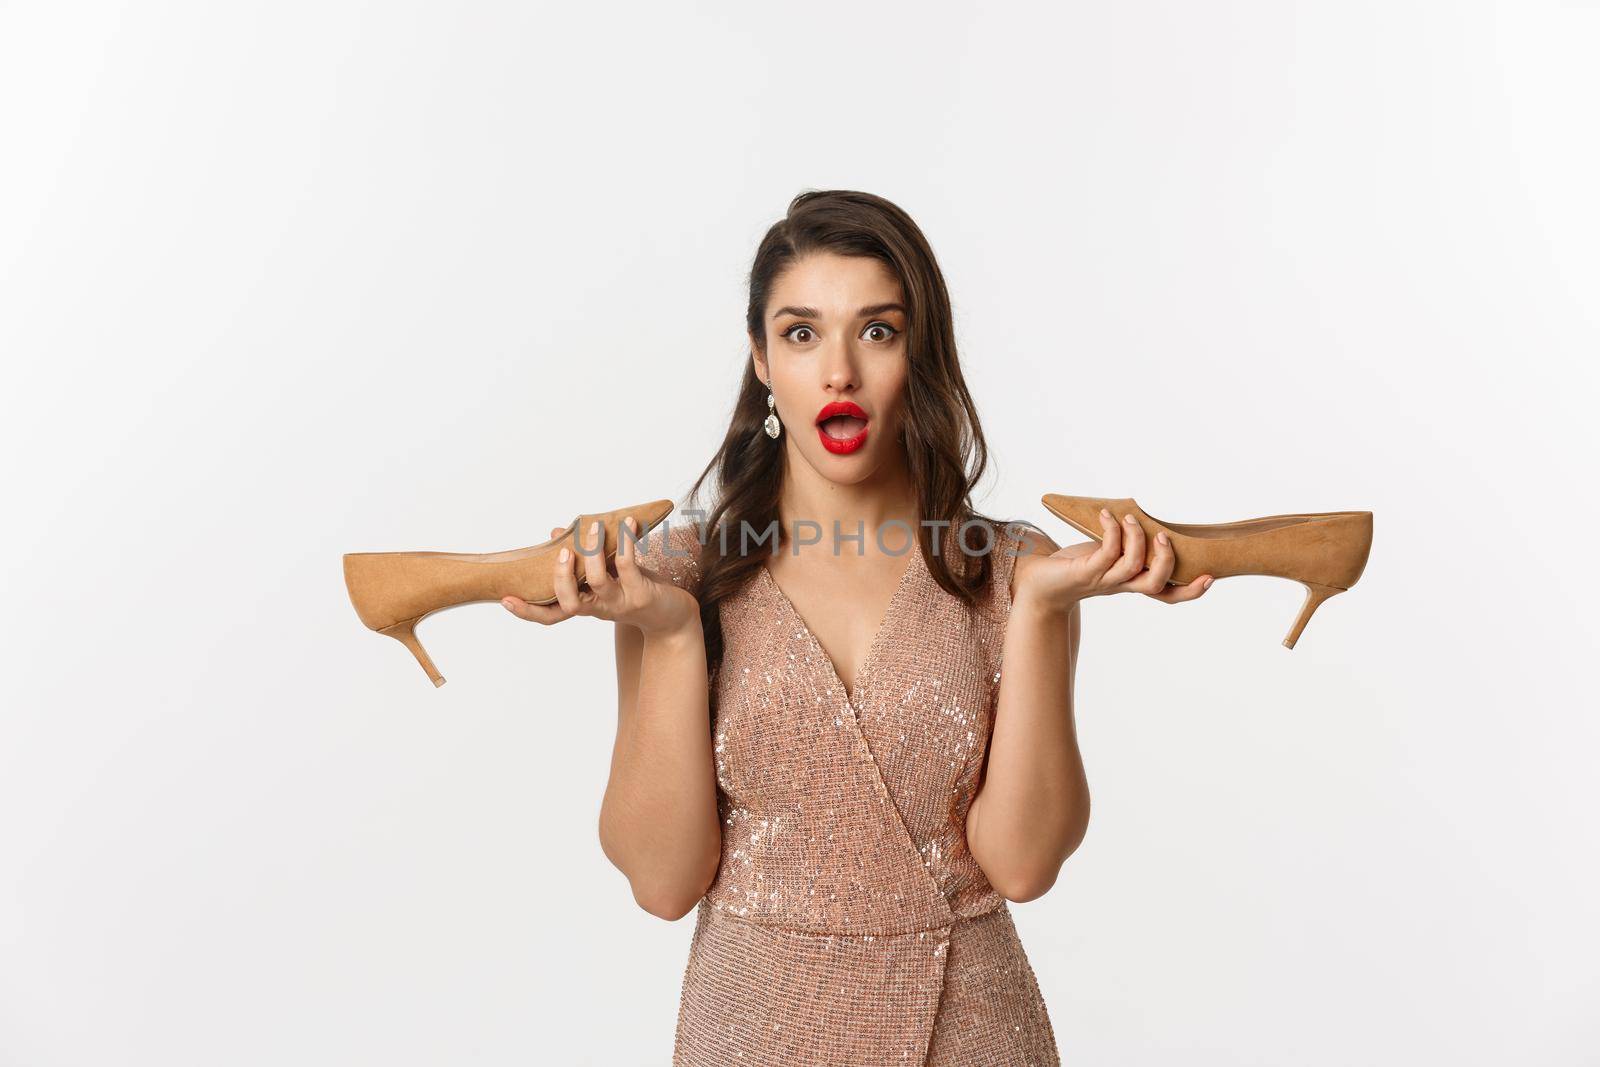 Party and celebration concept. Attractive woman in elegant dress holding pair of heels and looking surprised, dressing up for Christmas, white background.